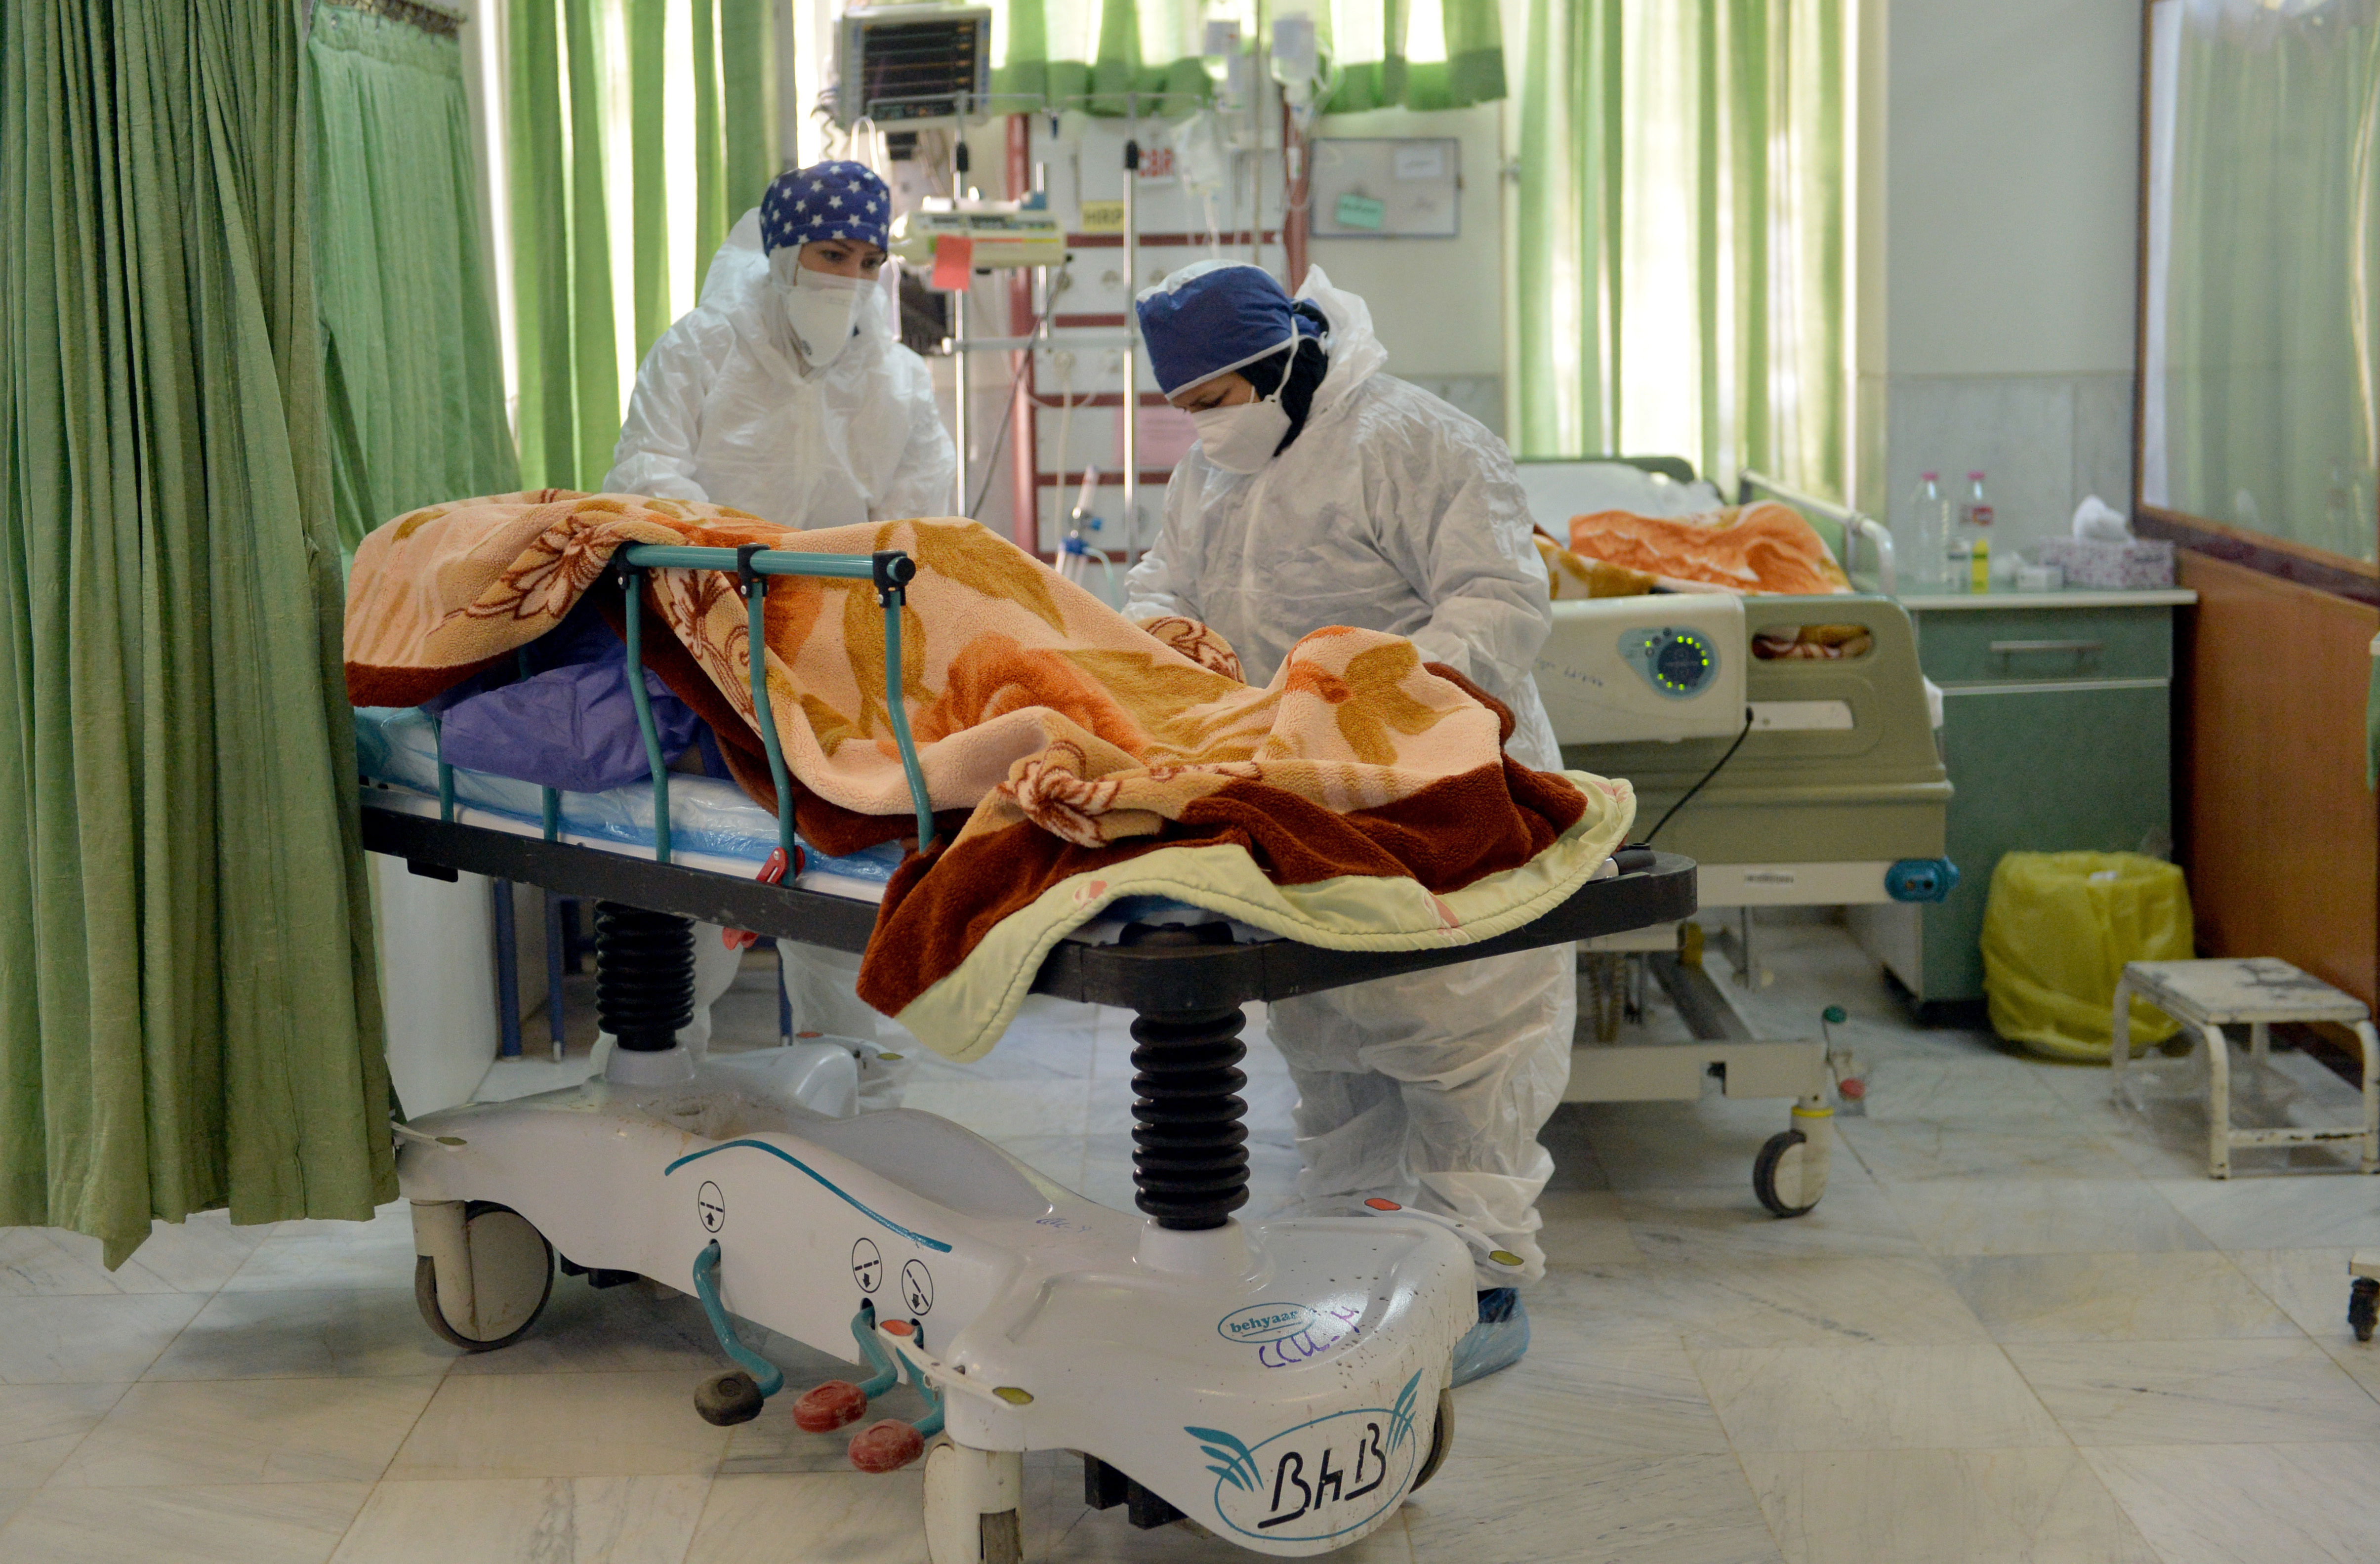 Health care staff at a hospital in Tehran, Iran, tend to a Covid-19 patient in the intensive care unit on December 20, 2020.